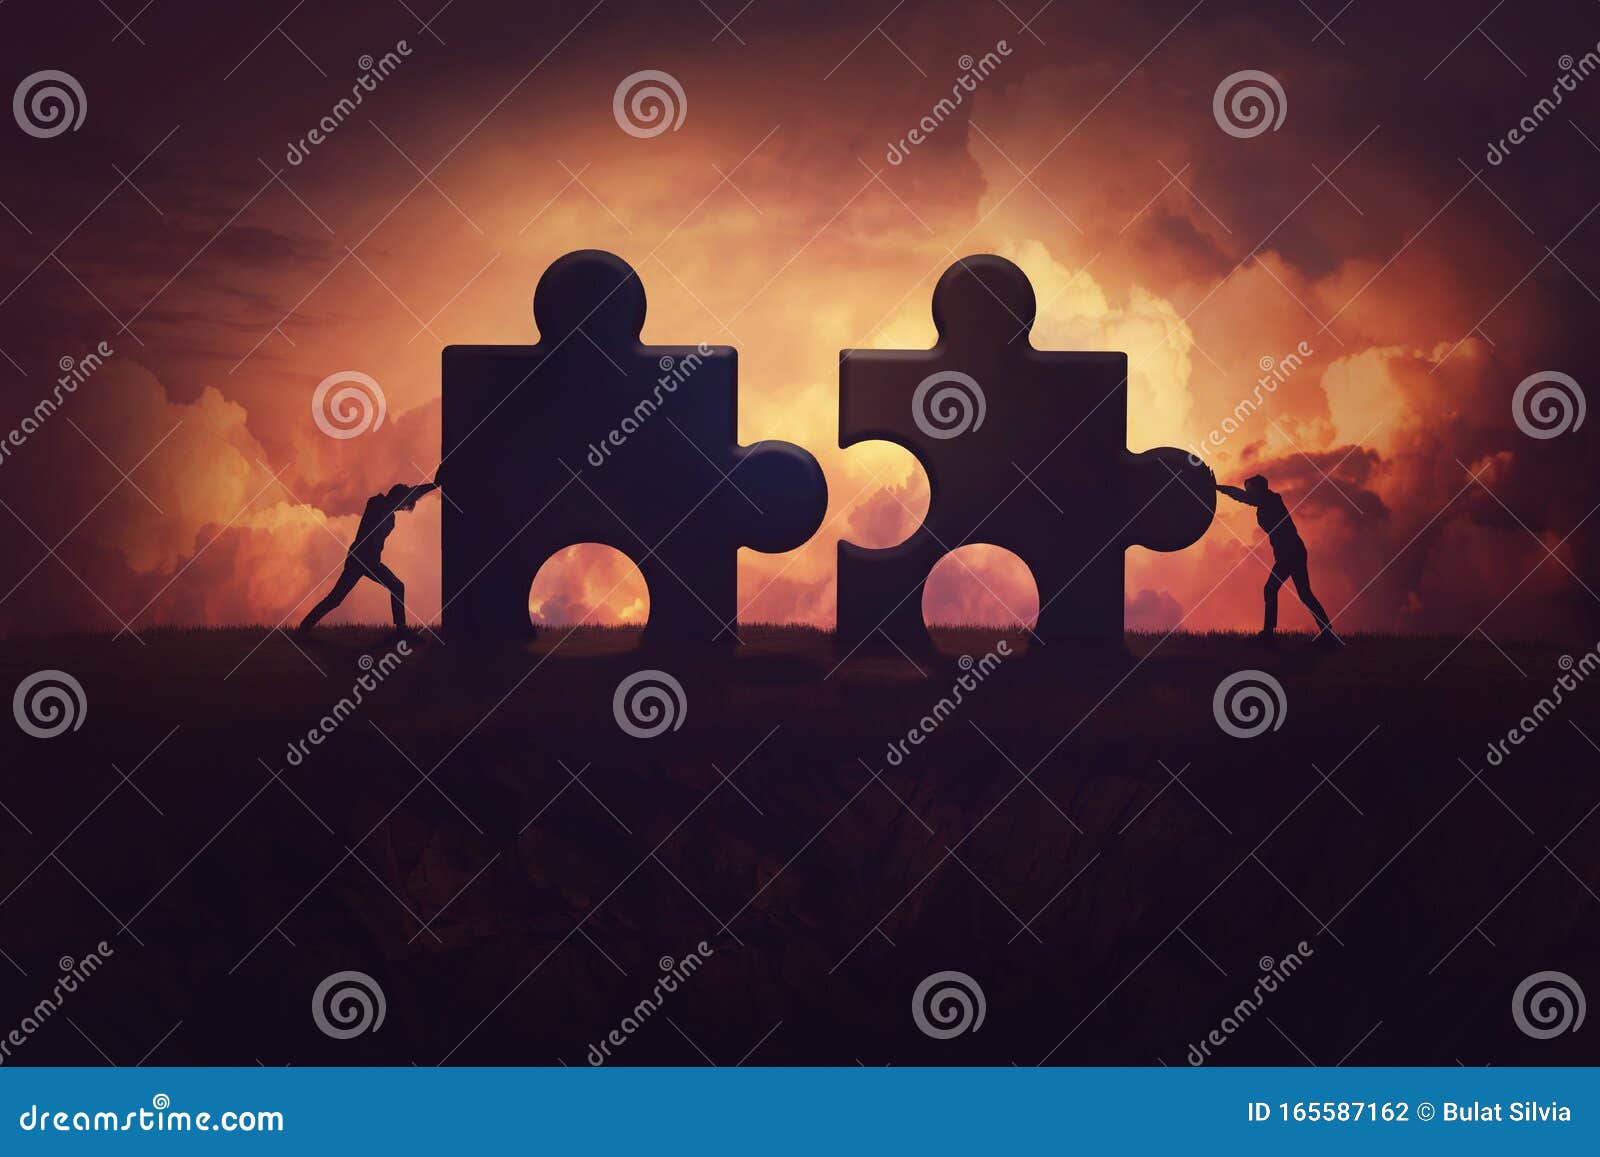 two determined businessman pushing big jigsaw puzzle pieces to unite and complete the purpose. business teamwork concept,